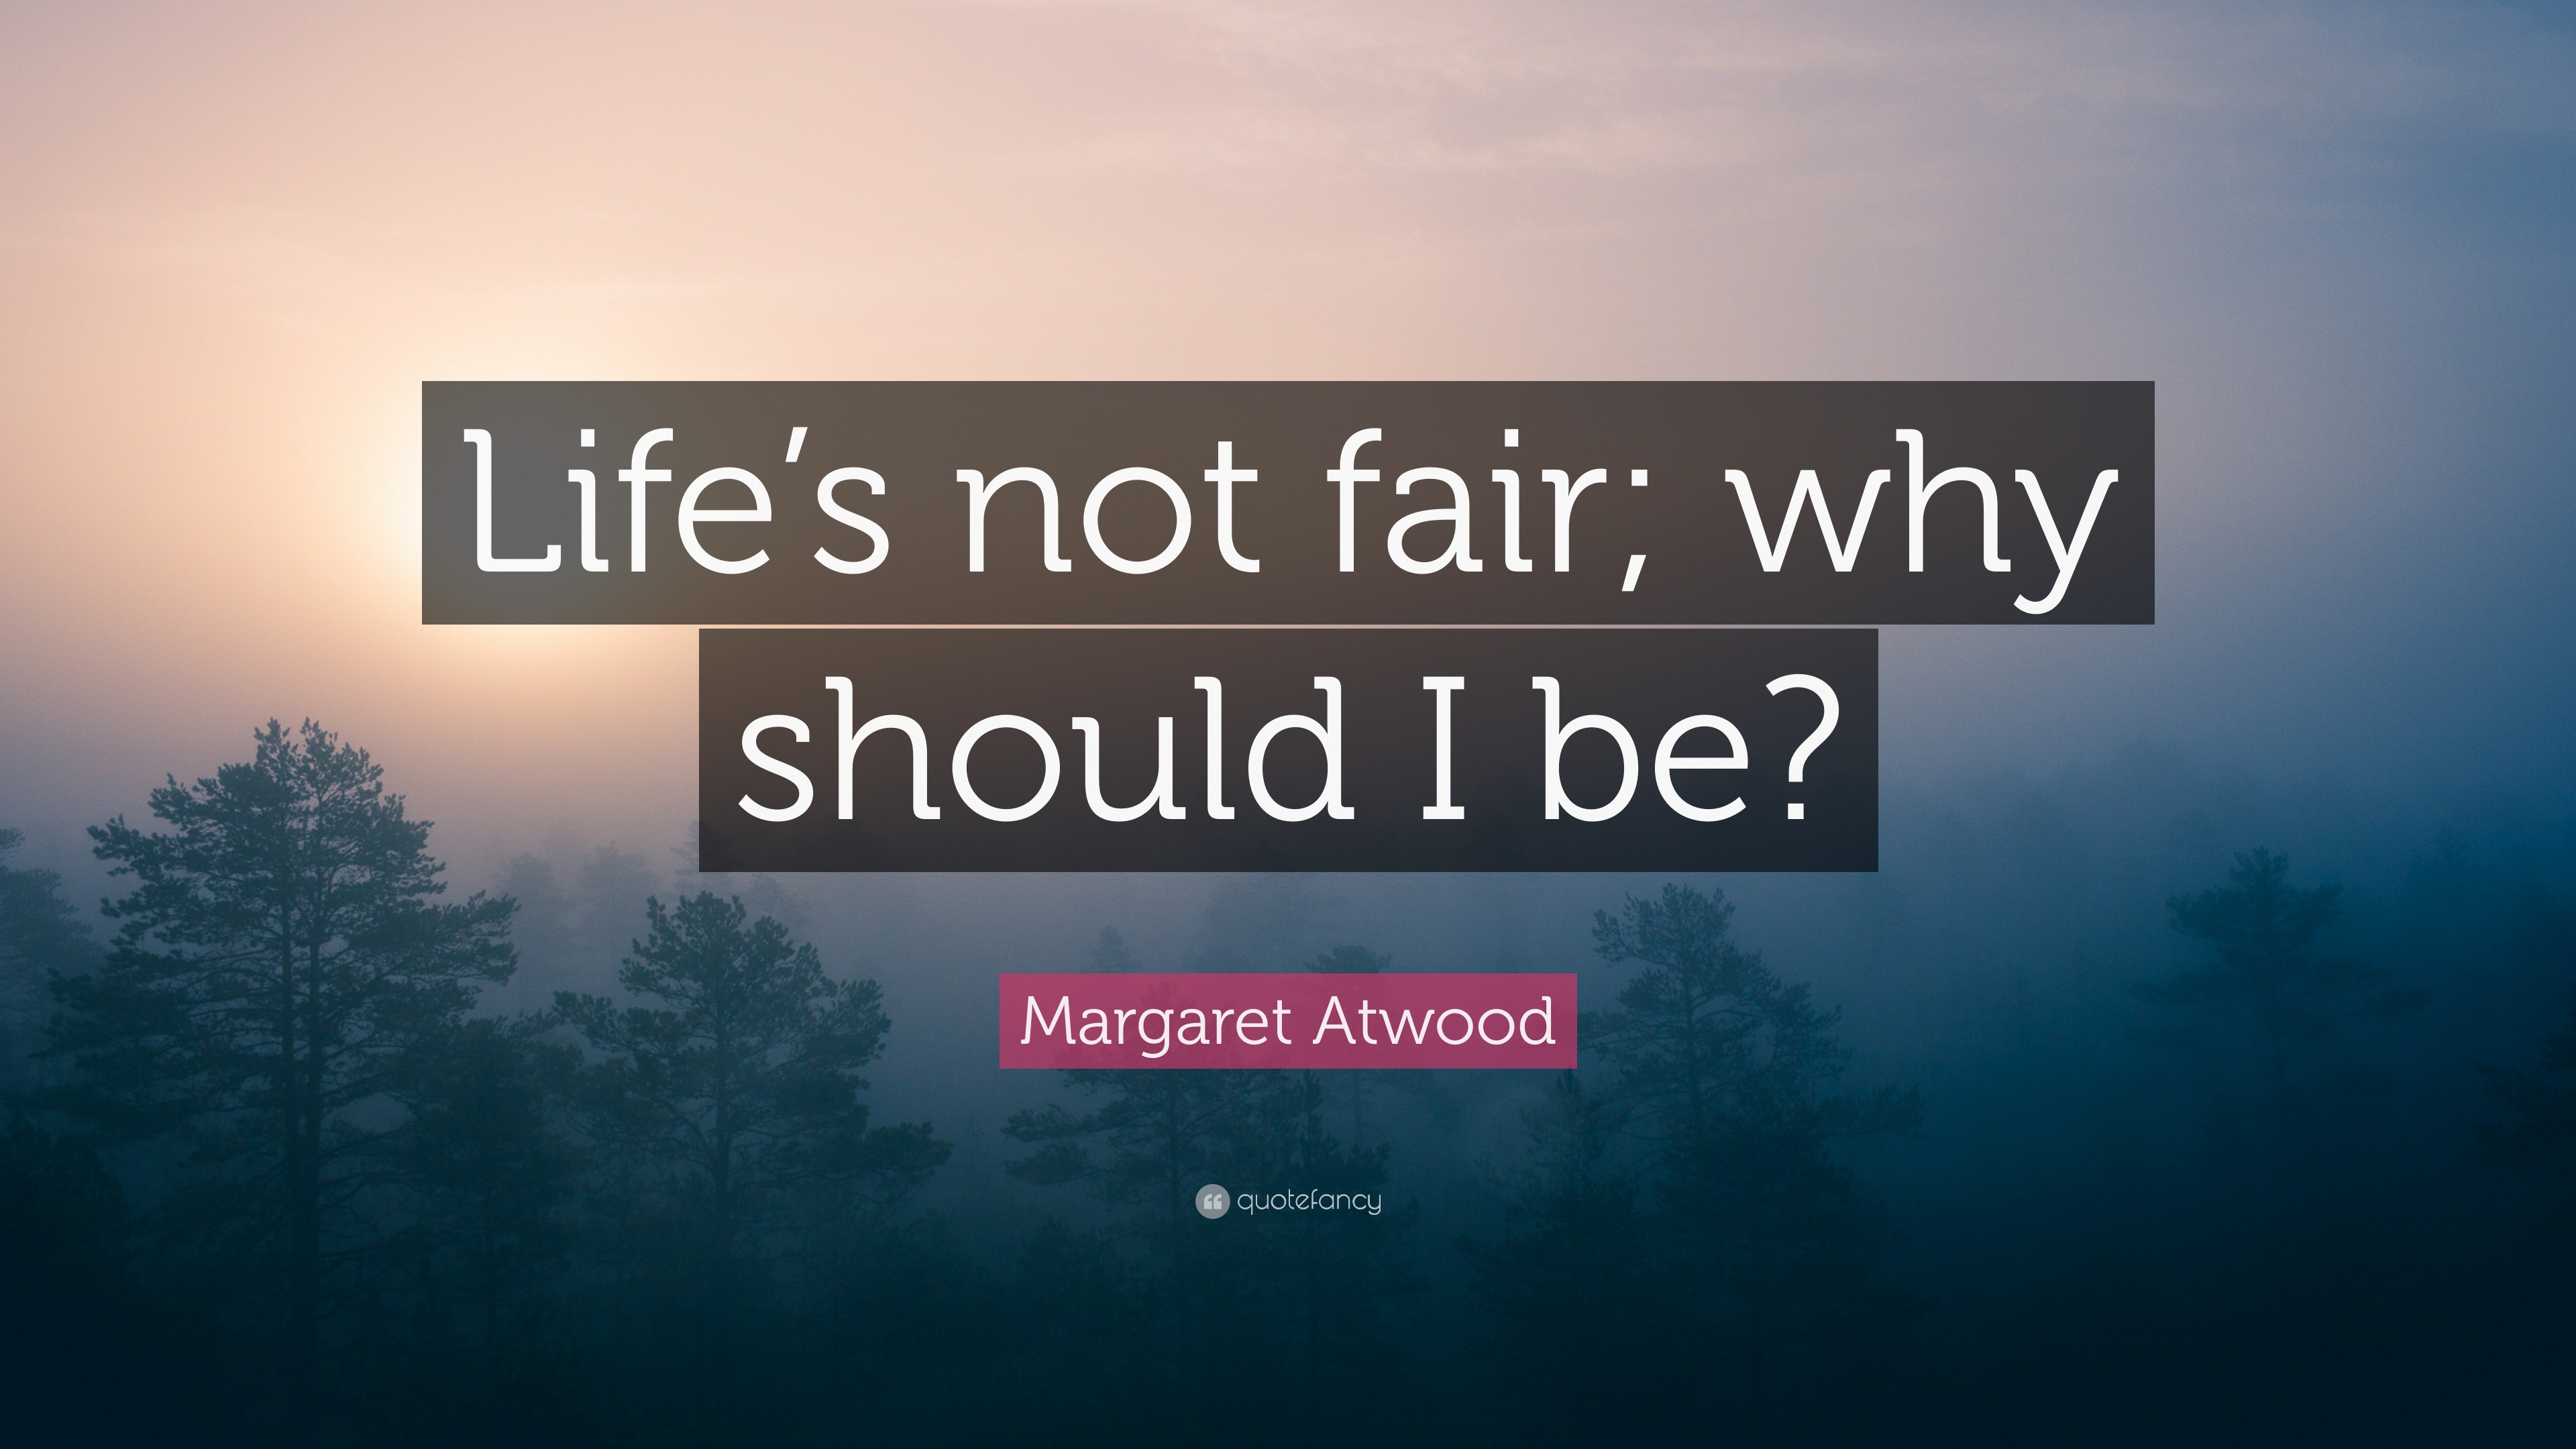 Margaret Atwood Quote “Life’s not fair; why should I be?”